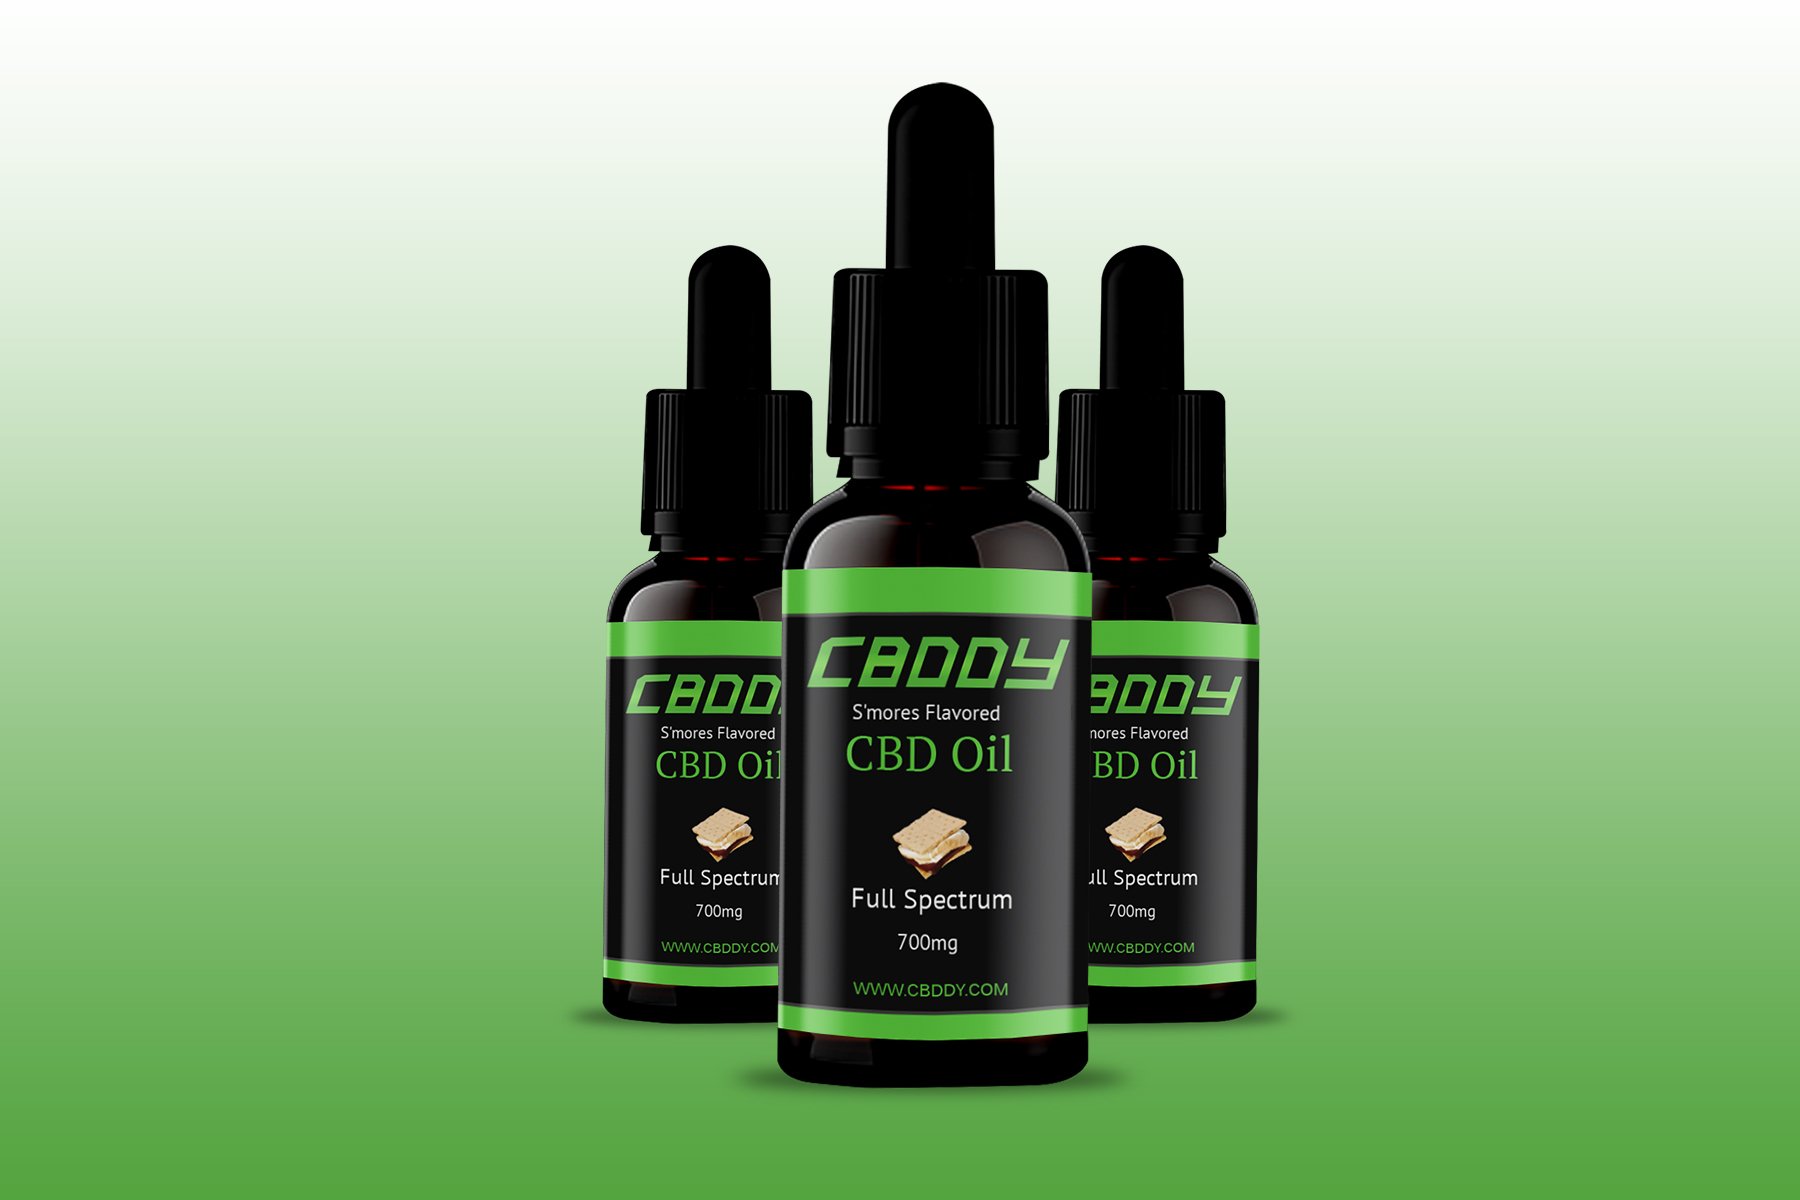 What are the differences and effects of Delta 8 THC and CBD Tinctures